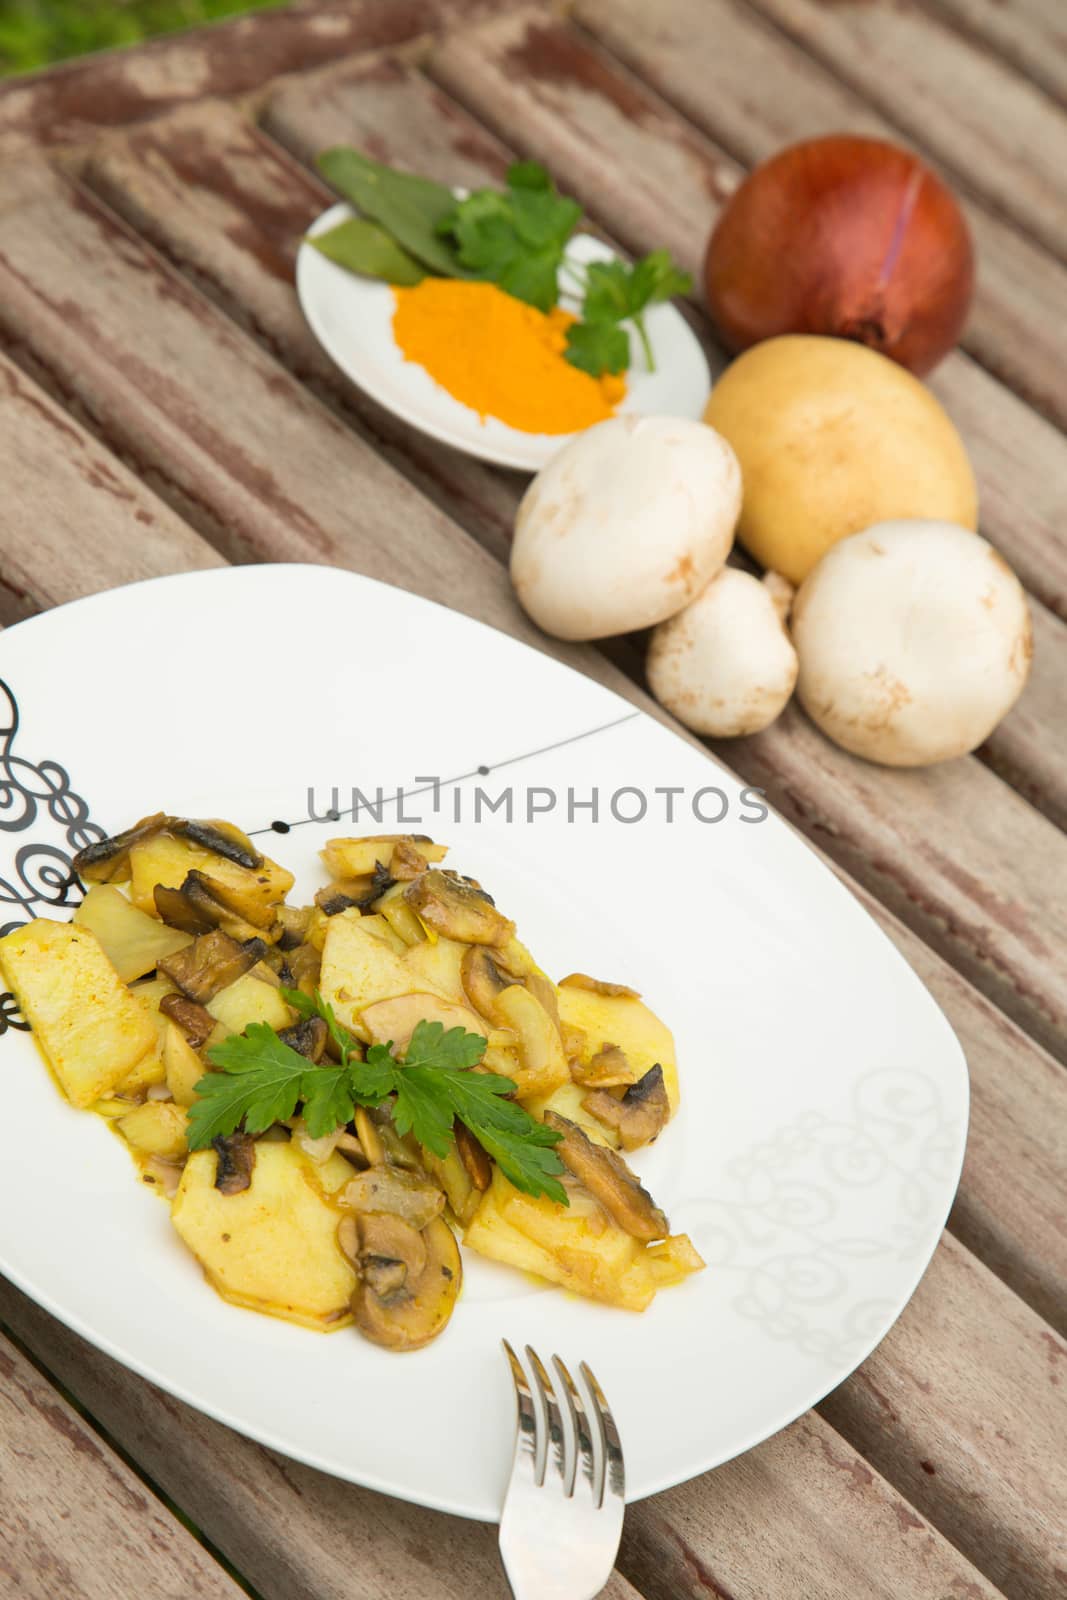 Baked potatoes with mushrooms and curcuma.Ingredients in the background